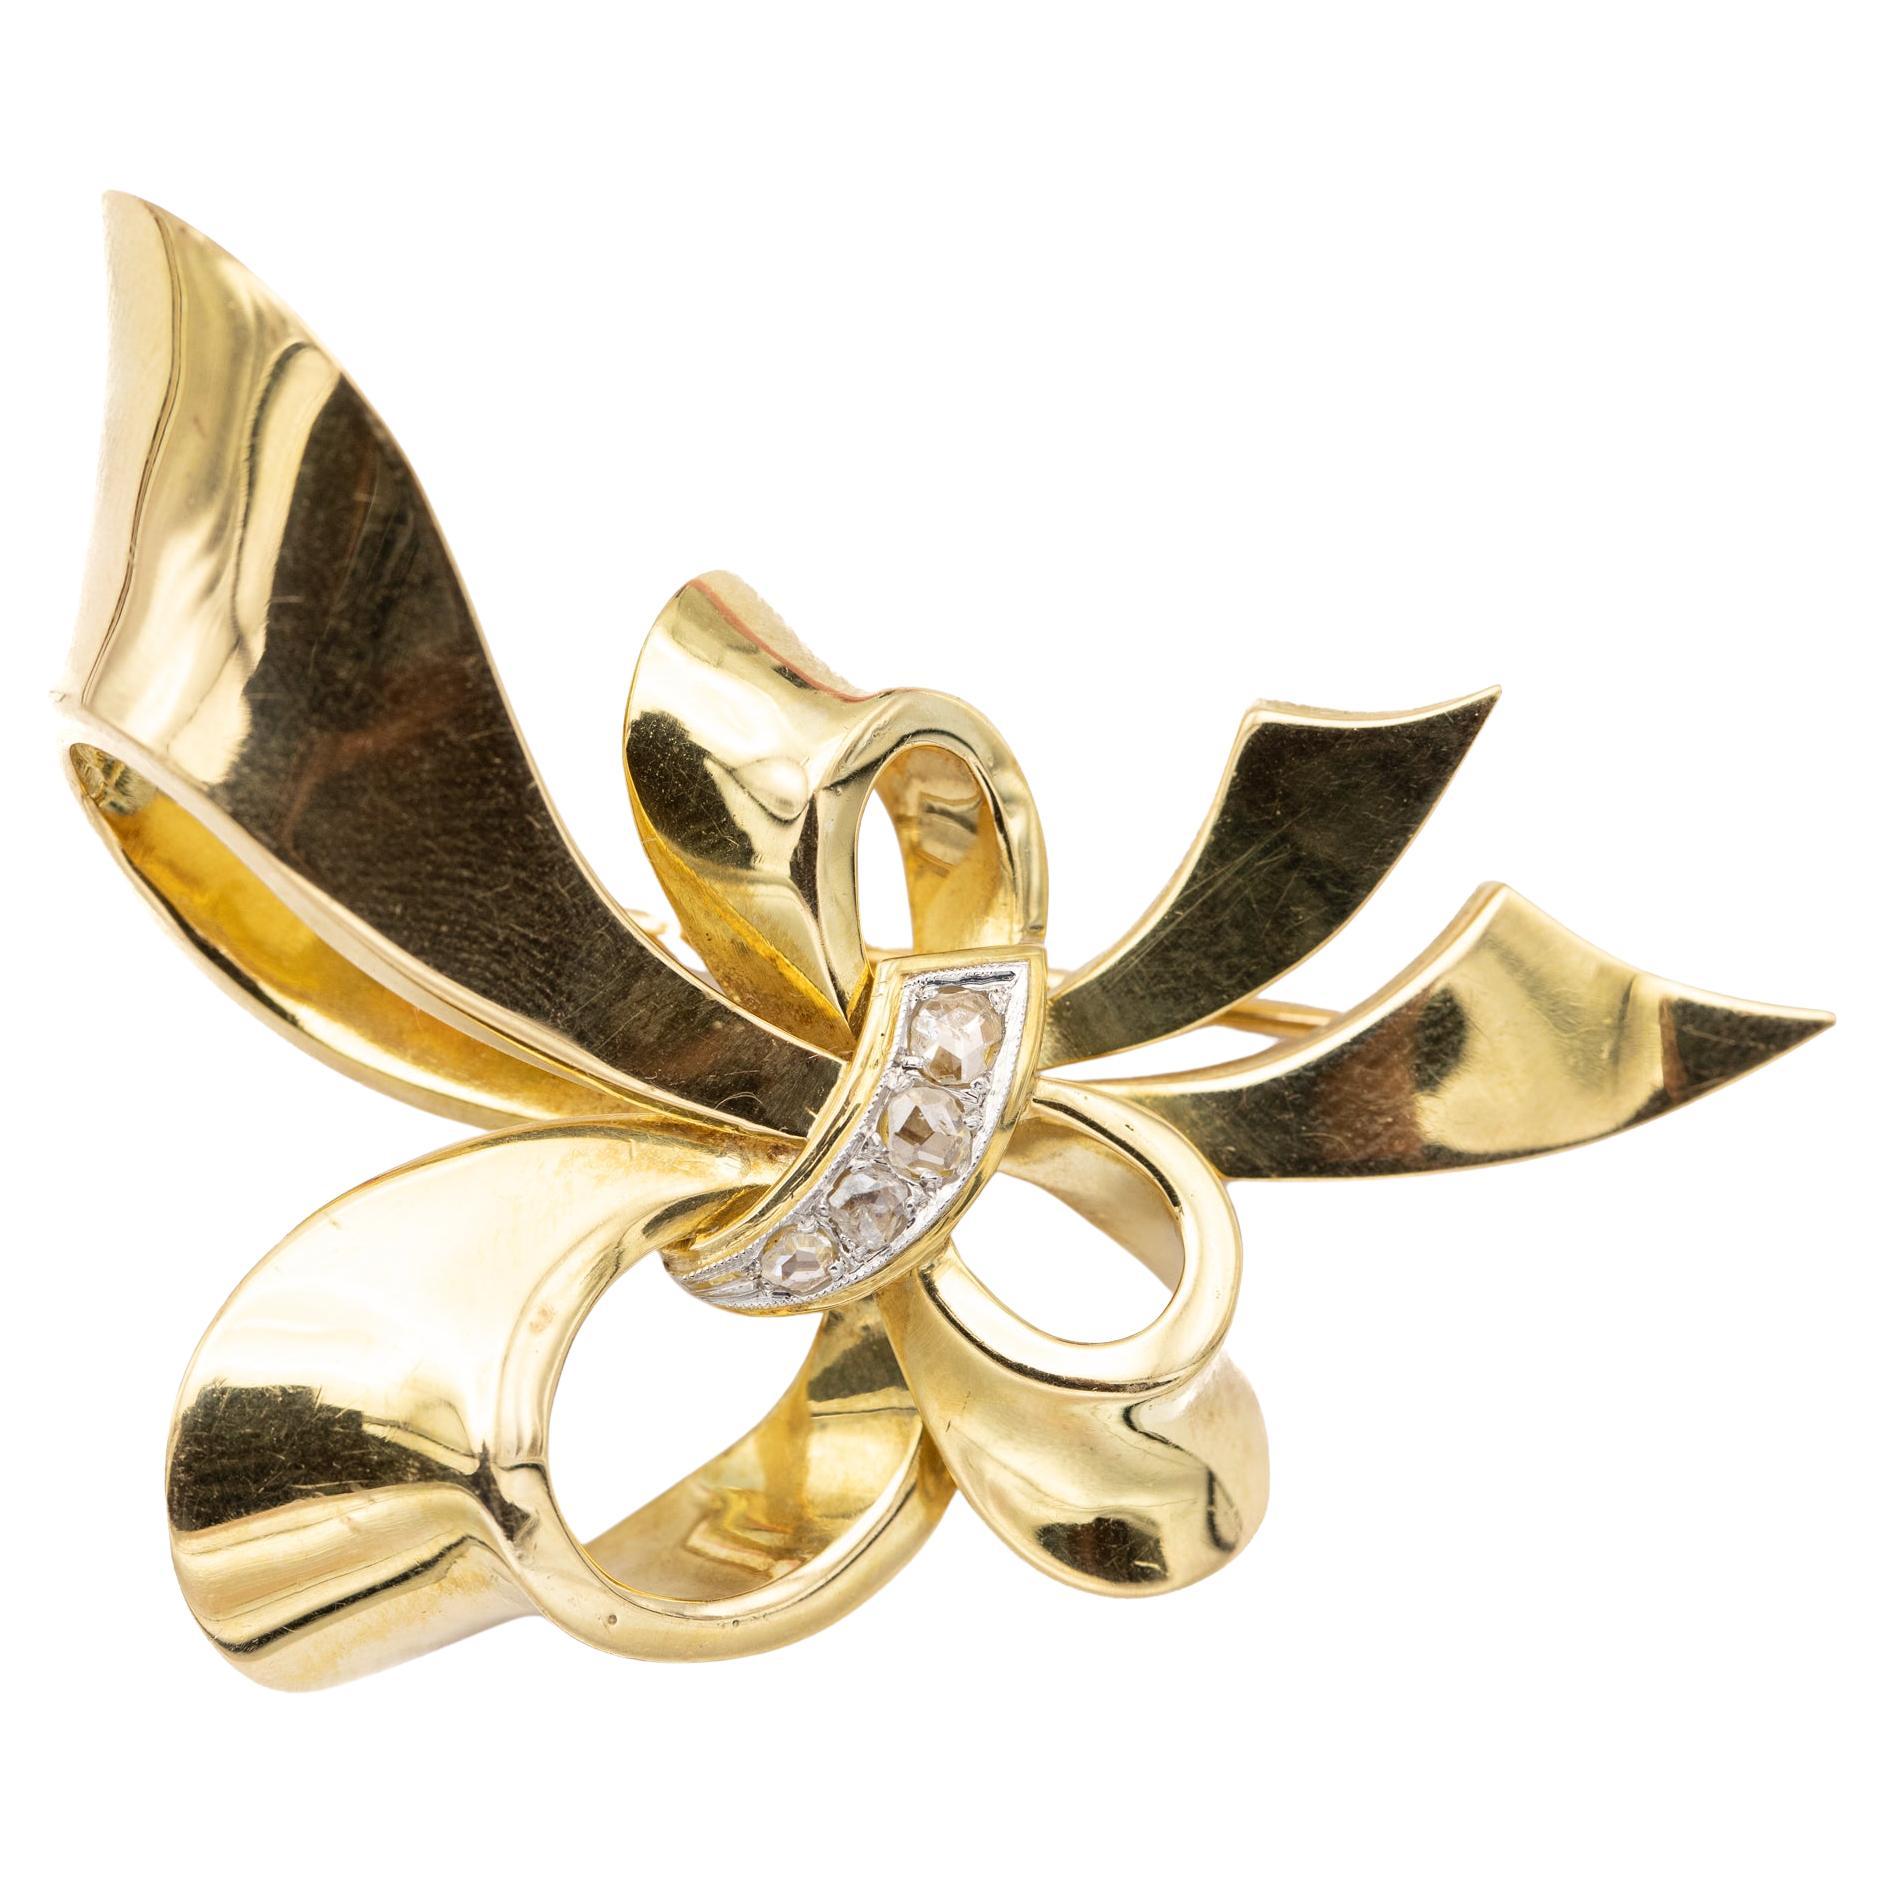 Heavy Elegant 18k bow Brooch - 1940's collar pin - solid gold rose cut diamonds For Sale